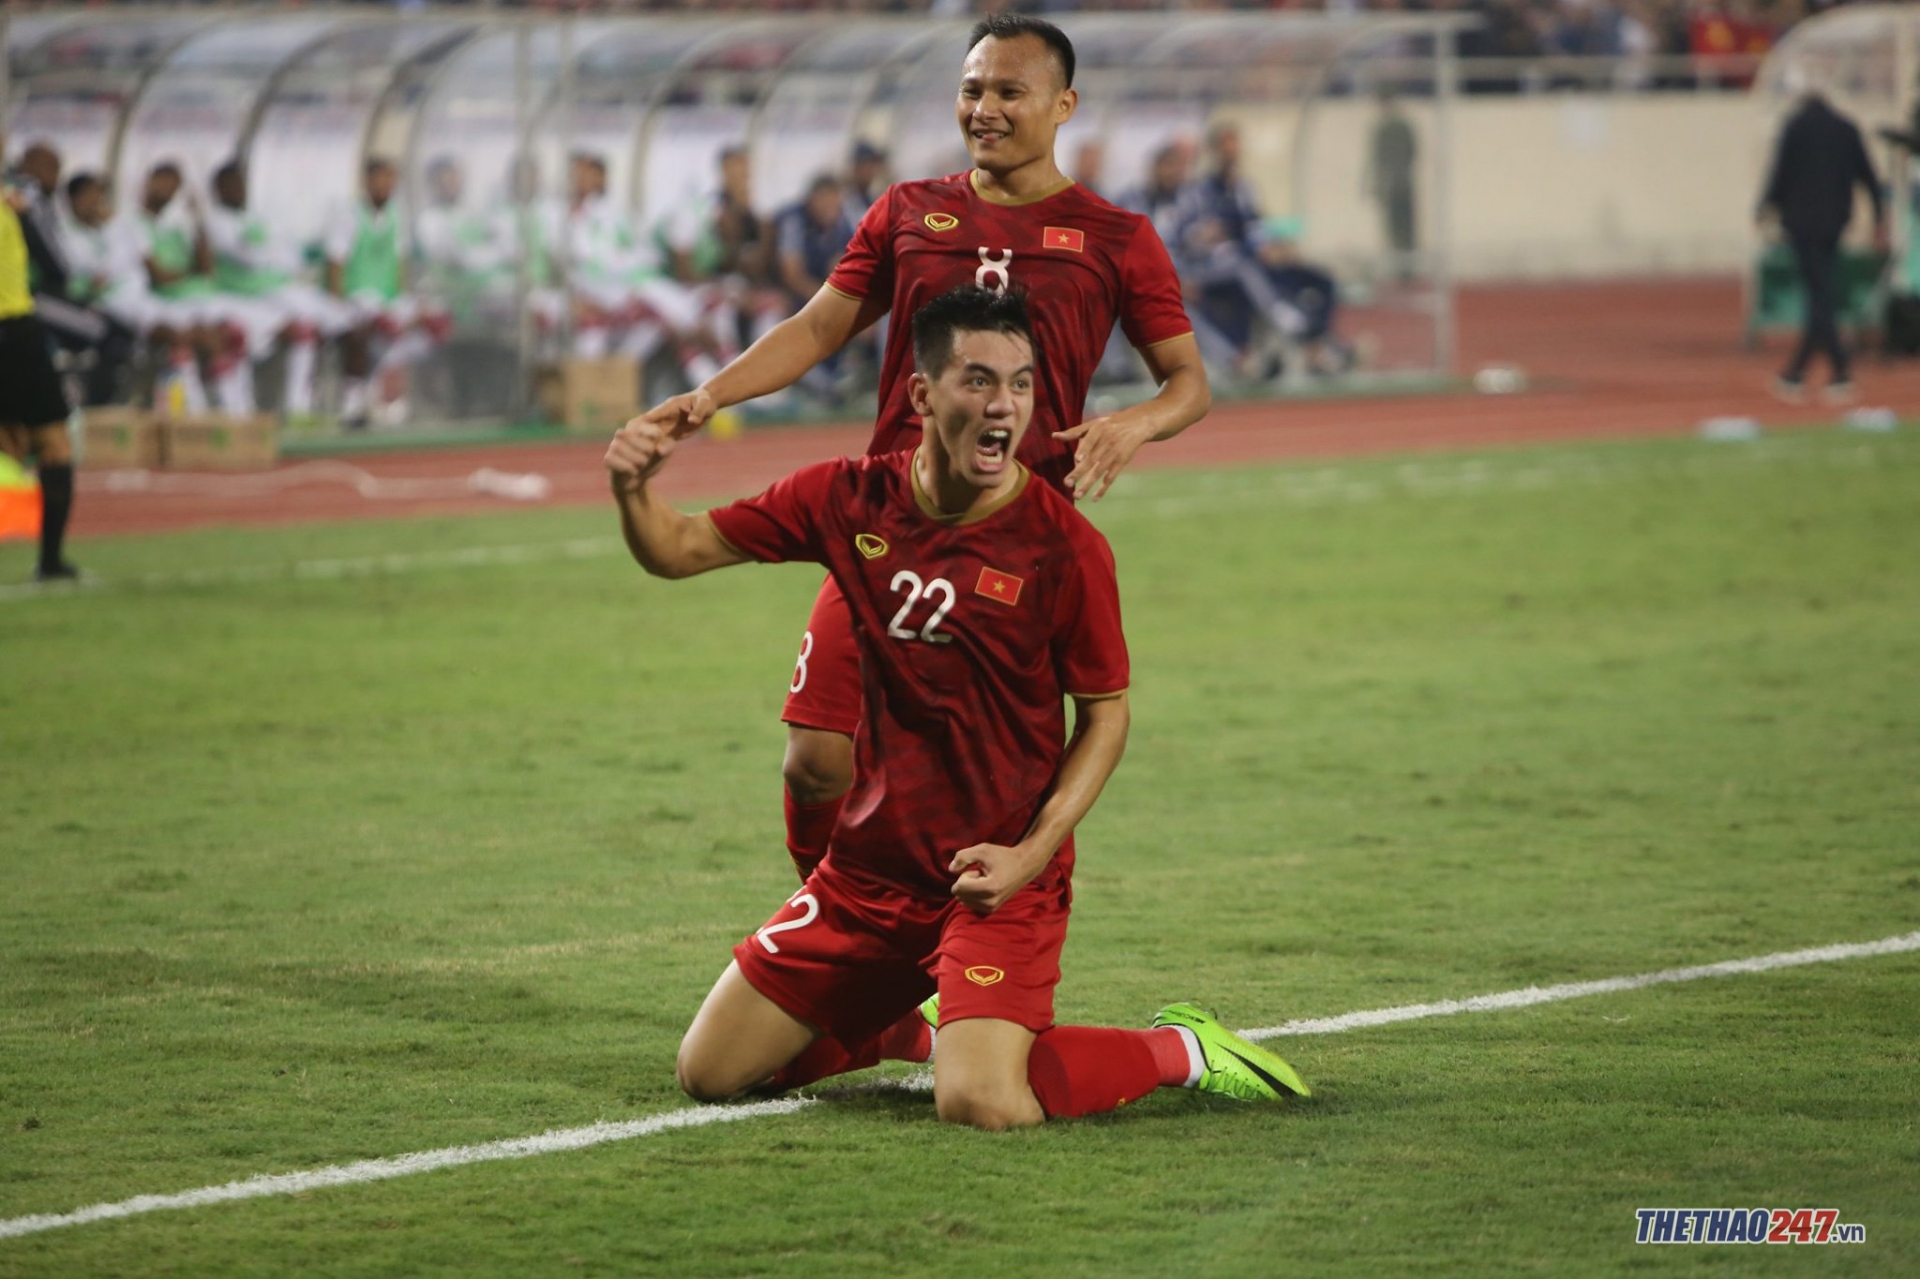 Tien Linh scored against the UAE in the 2022 World Cup qualifier. Photo: Van Hai